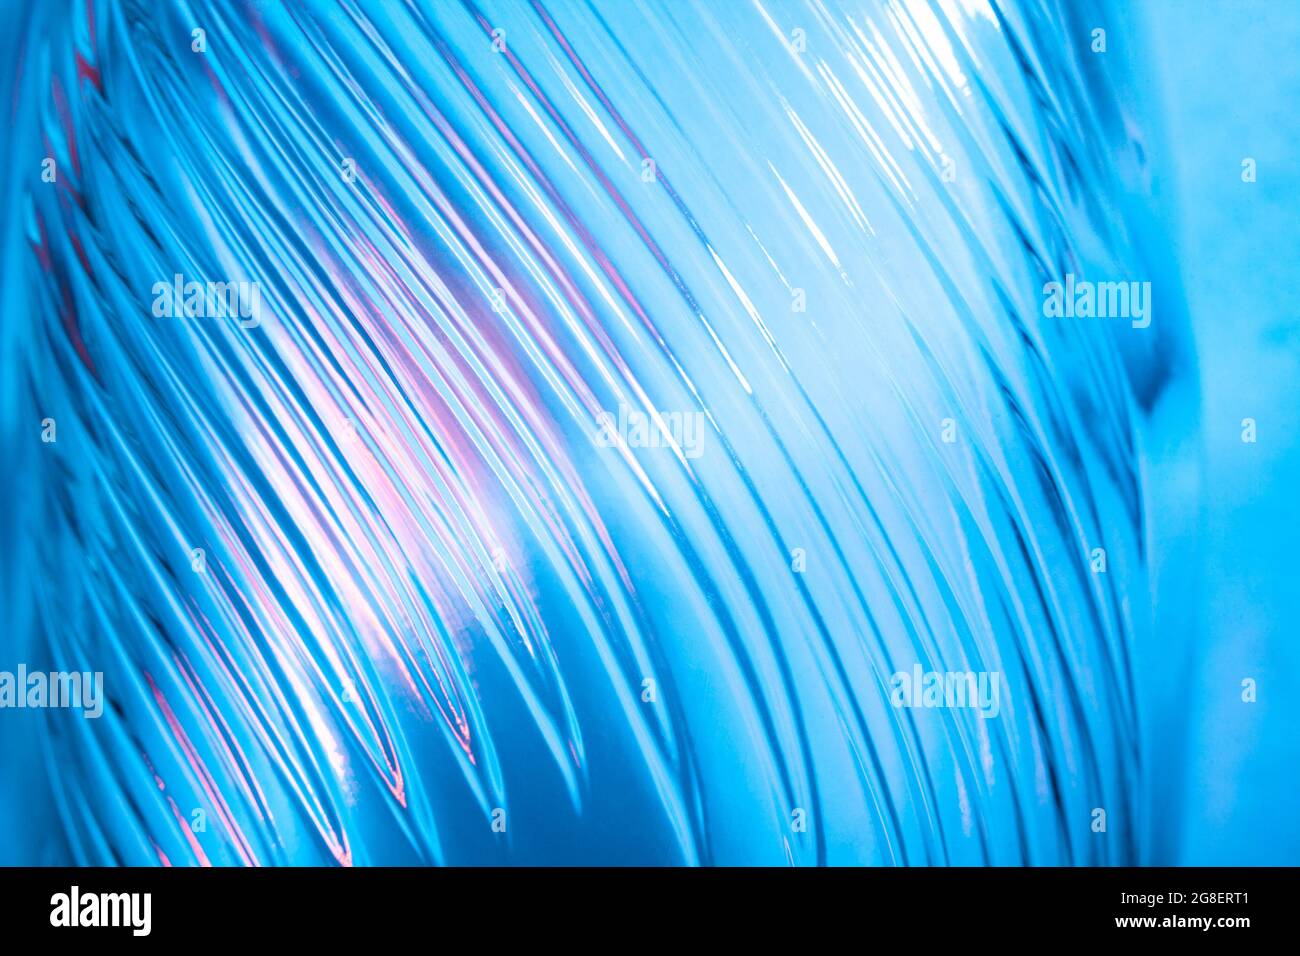 Abstract glass background. Texture of wavy glass illuminated with multi-colored light. Pink and blue stains. Close up. Flares on glass Stock Photo